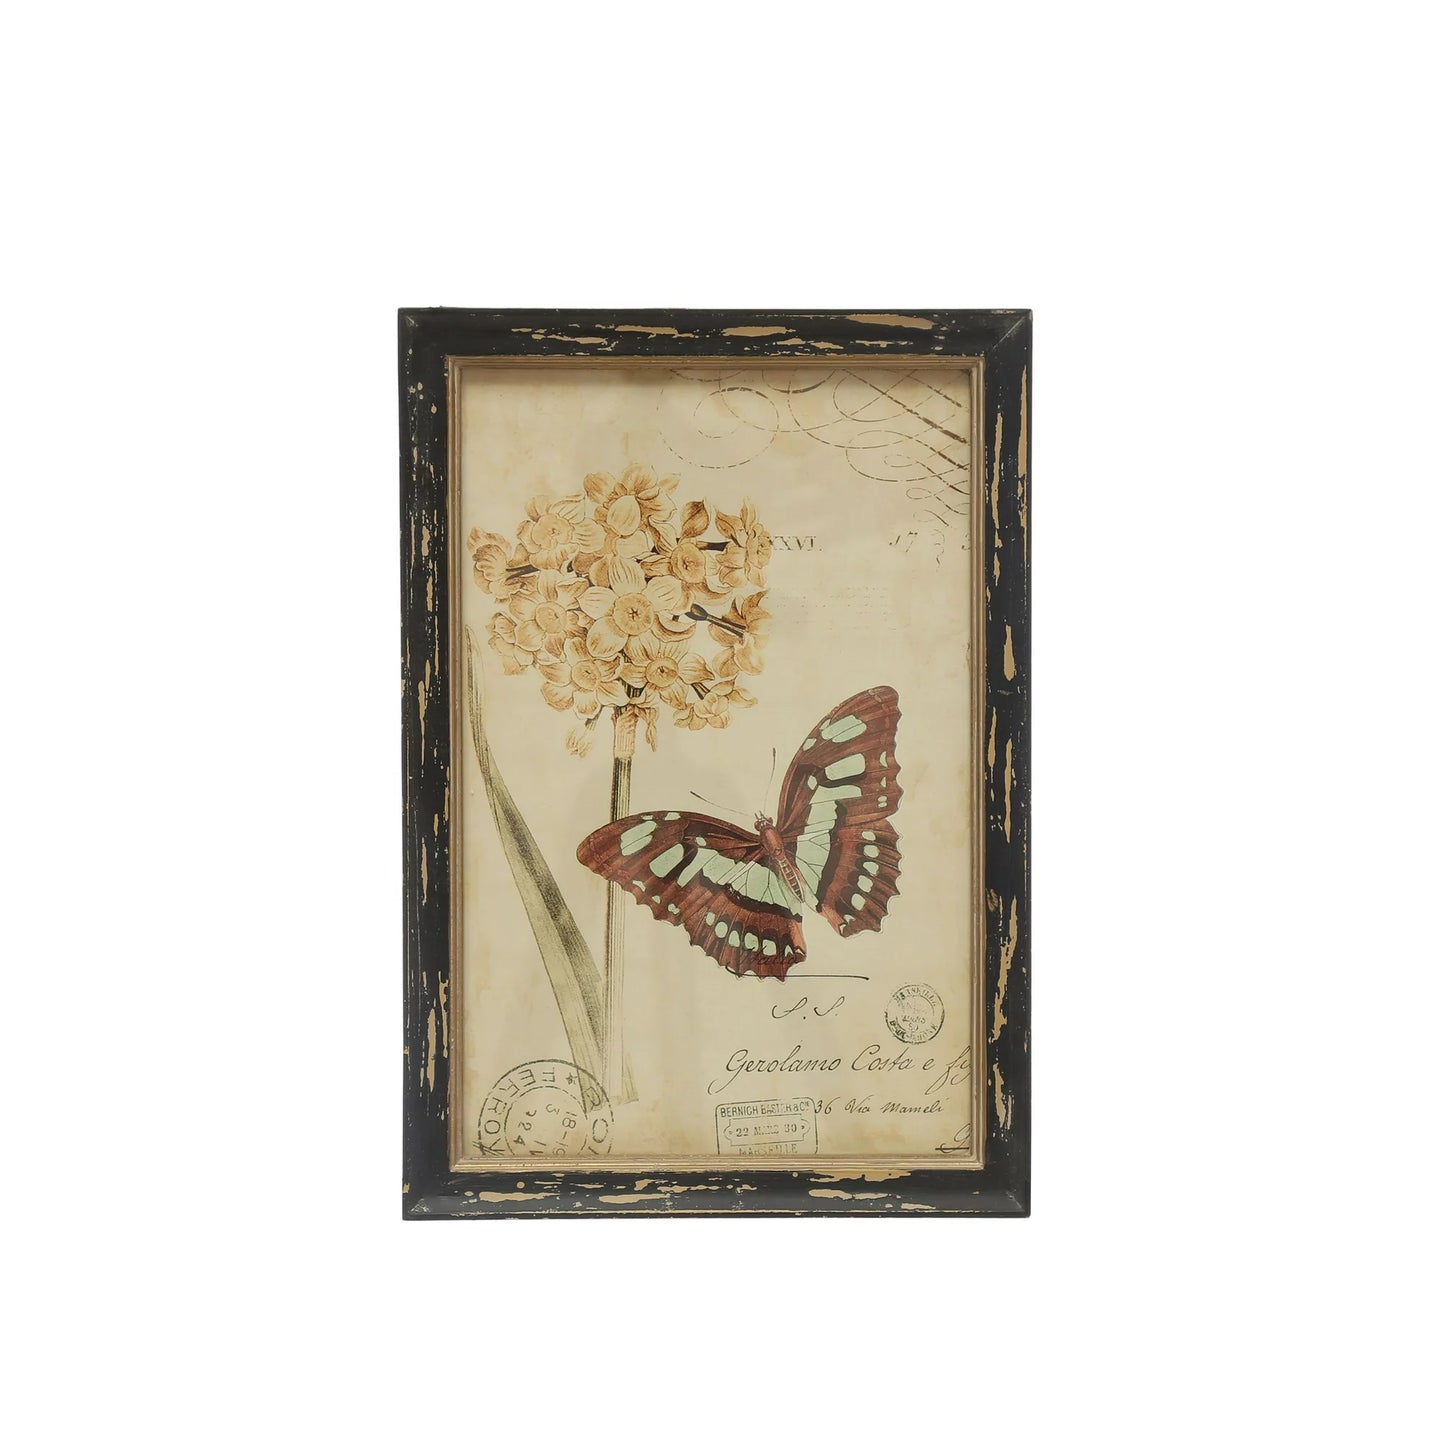 *NEW* Butterfly Wall Décor by Ashland